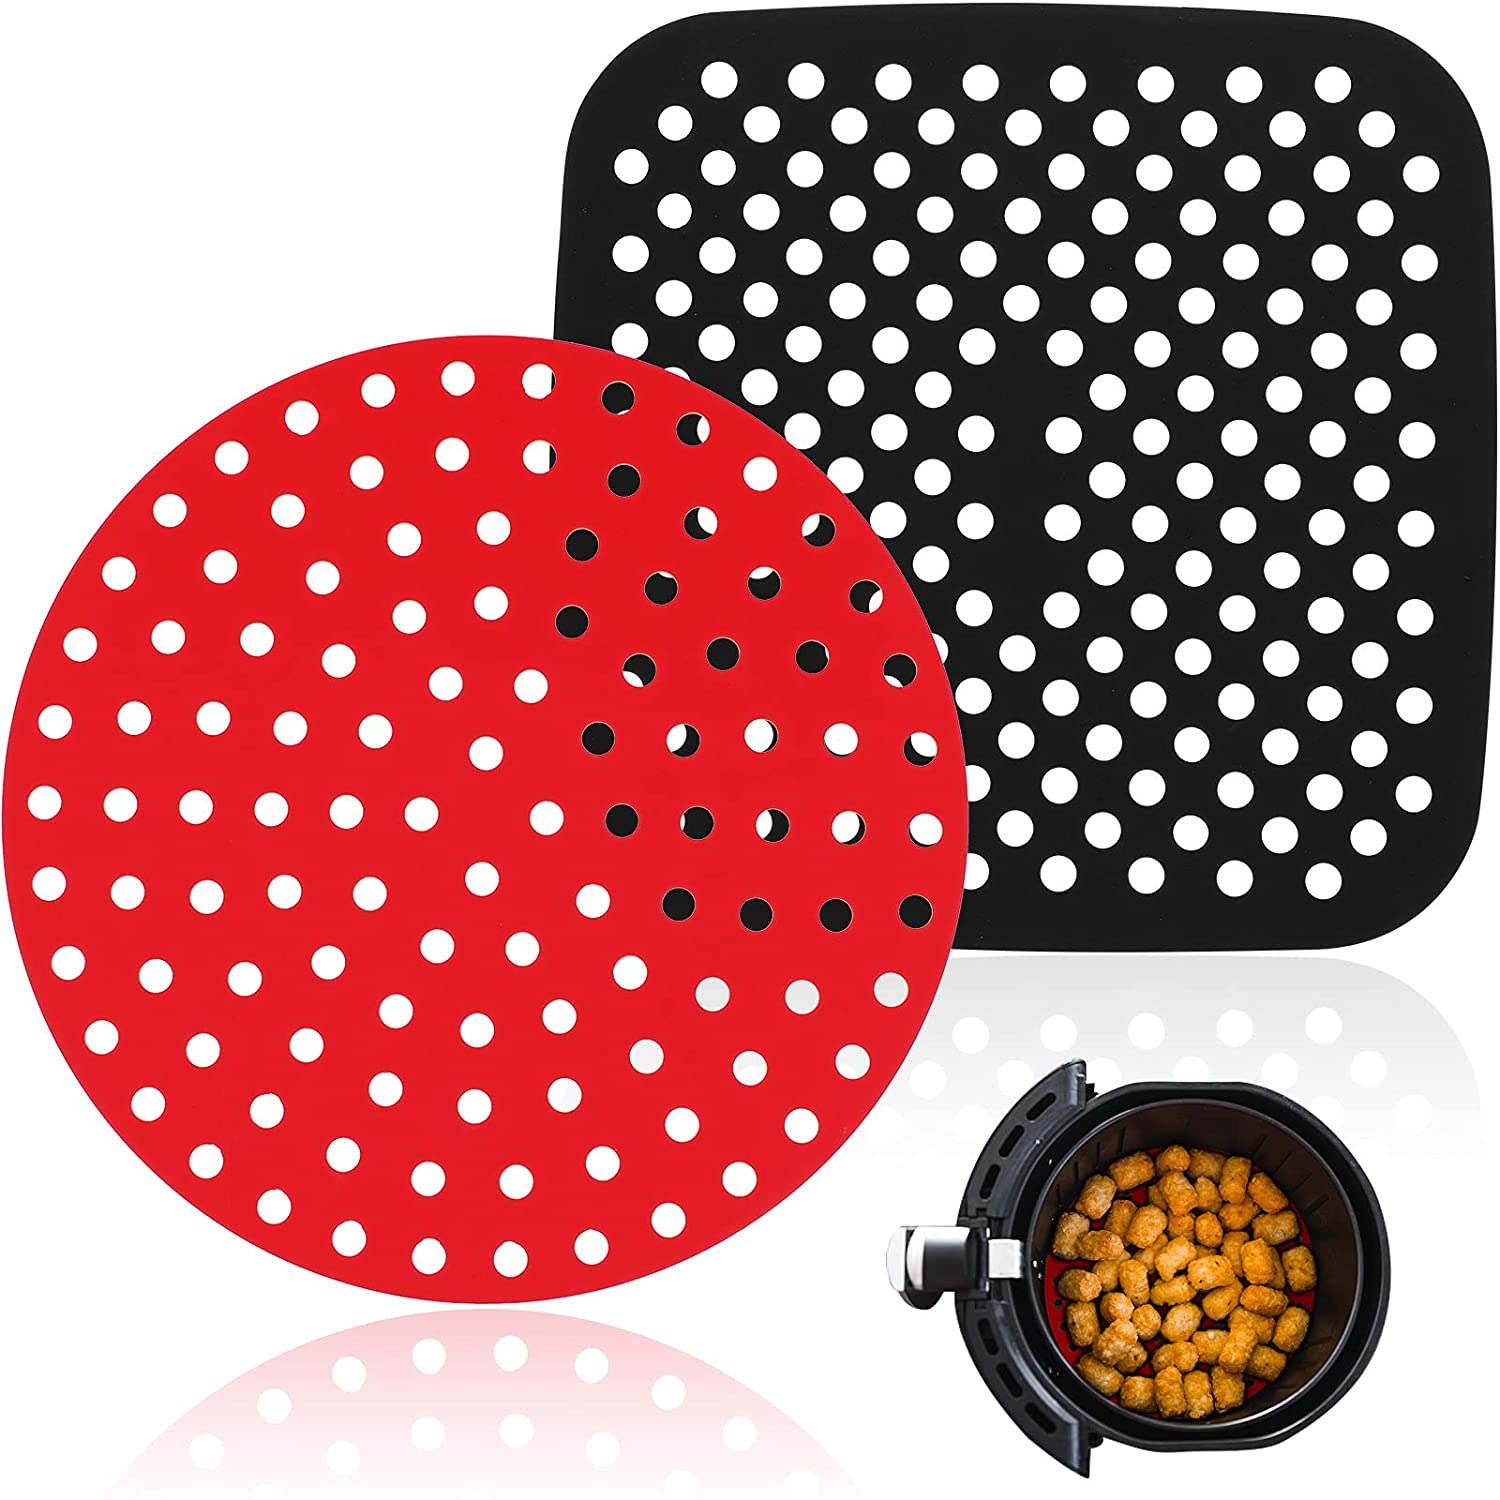 Yongli Non-Stick Basket Mats Round Reusable Silicone Air Fryer Featured Image